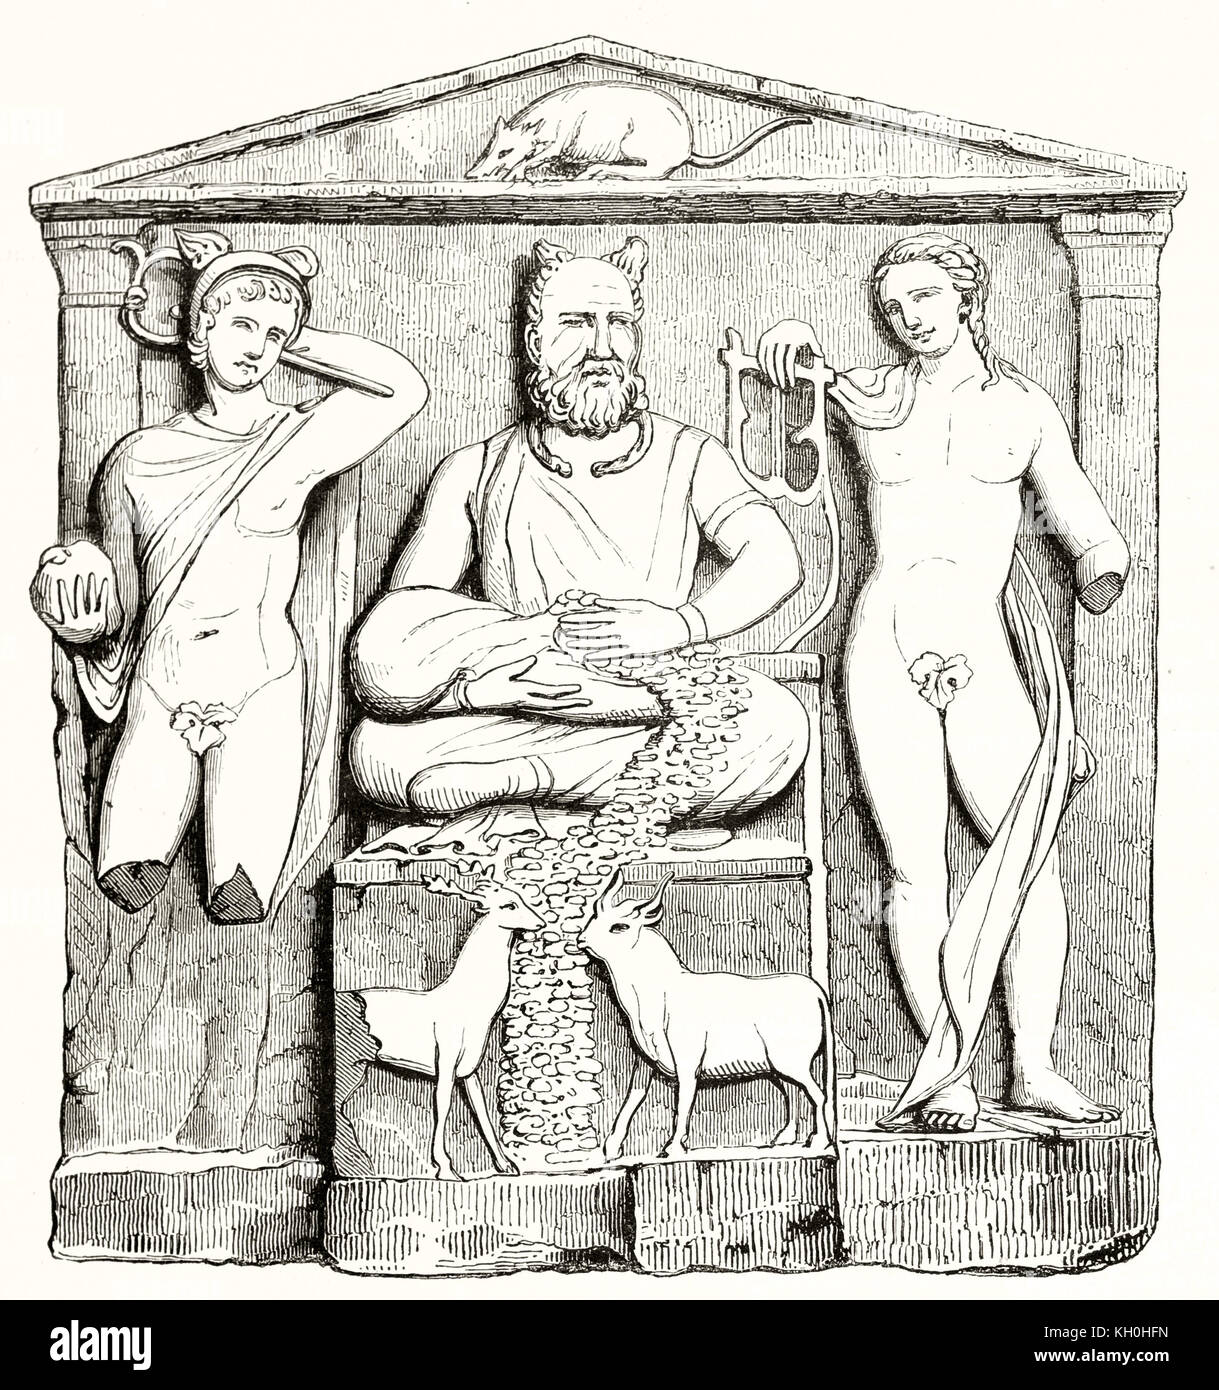 Old illustration depicting a Roman-Gaul altar kept in Reims museum. By unidentified author, publ. on Magasin Pittoresque, Paris, 1847 Stock Photo